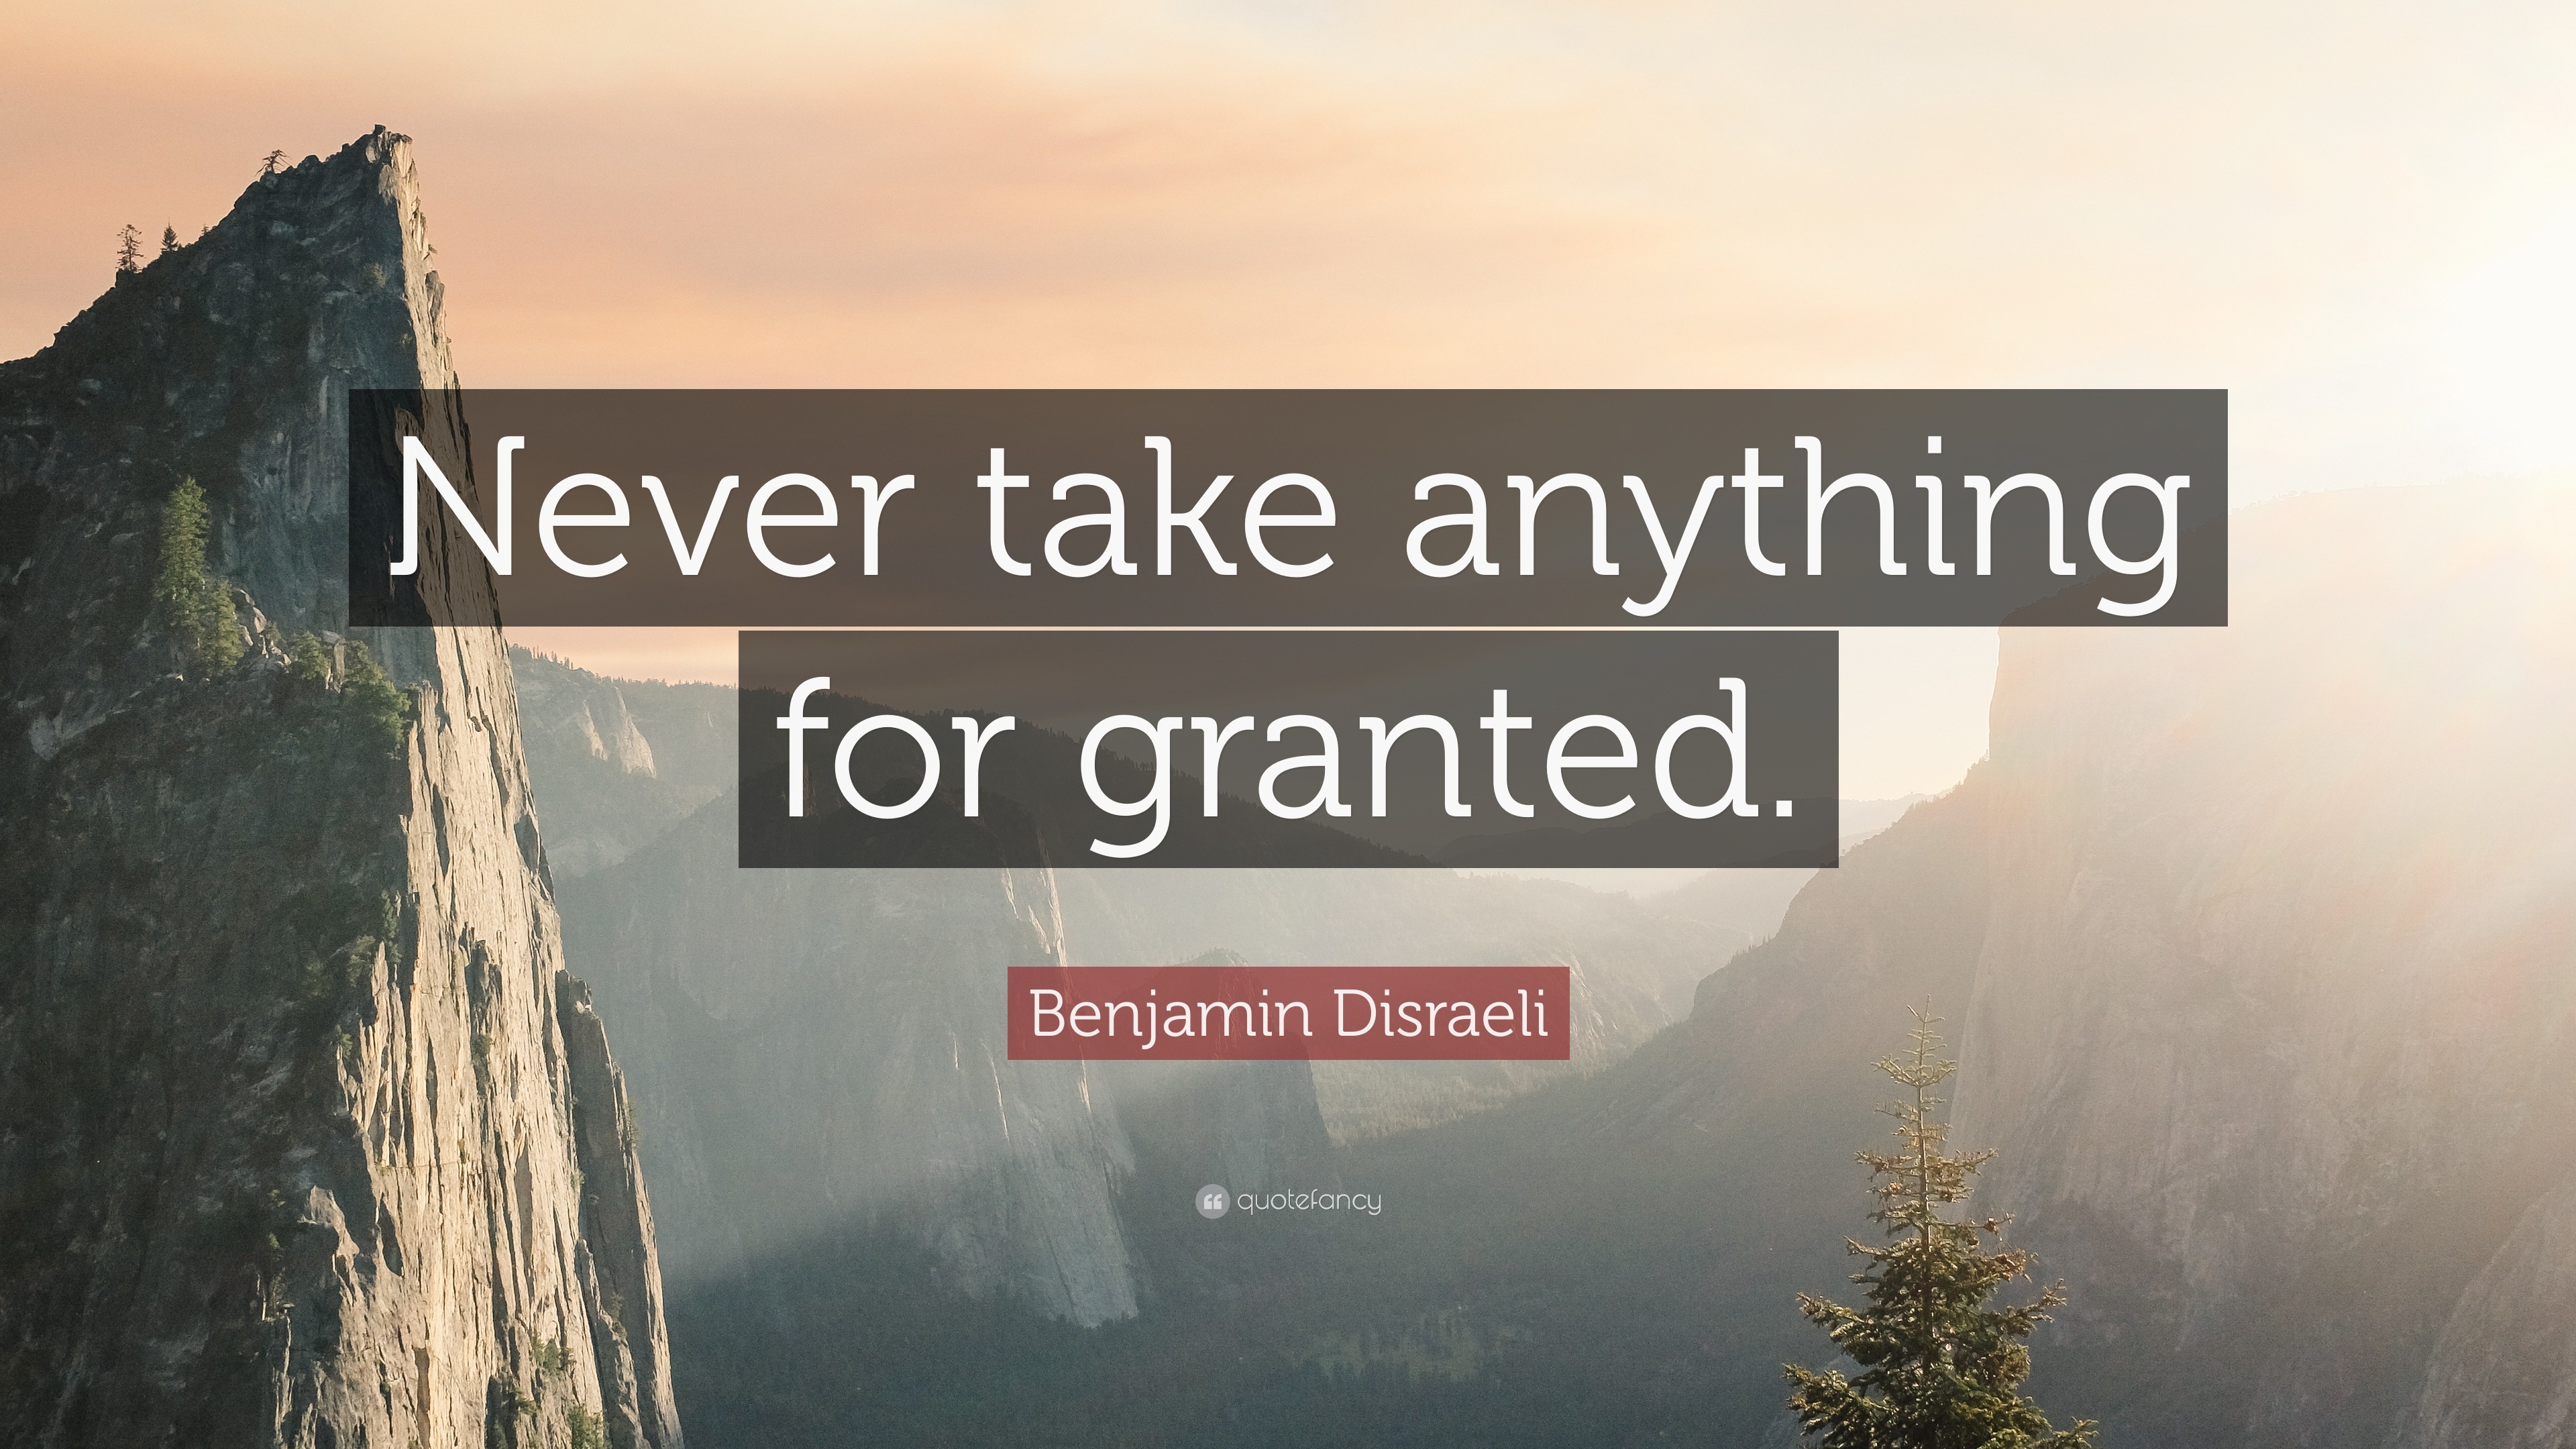 Benjamin Disraeli Quote “Never take anything for granted ”